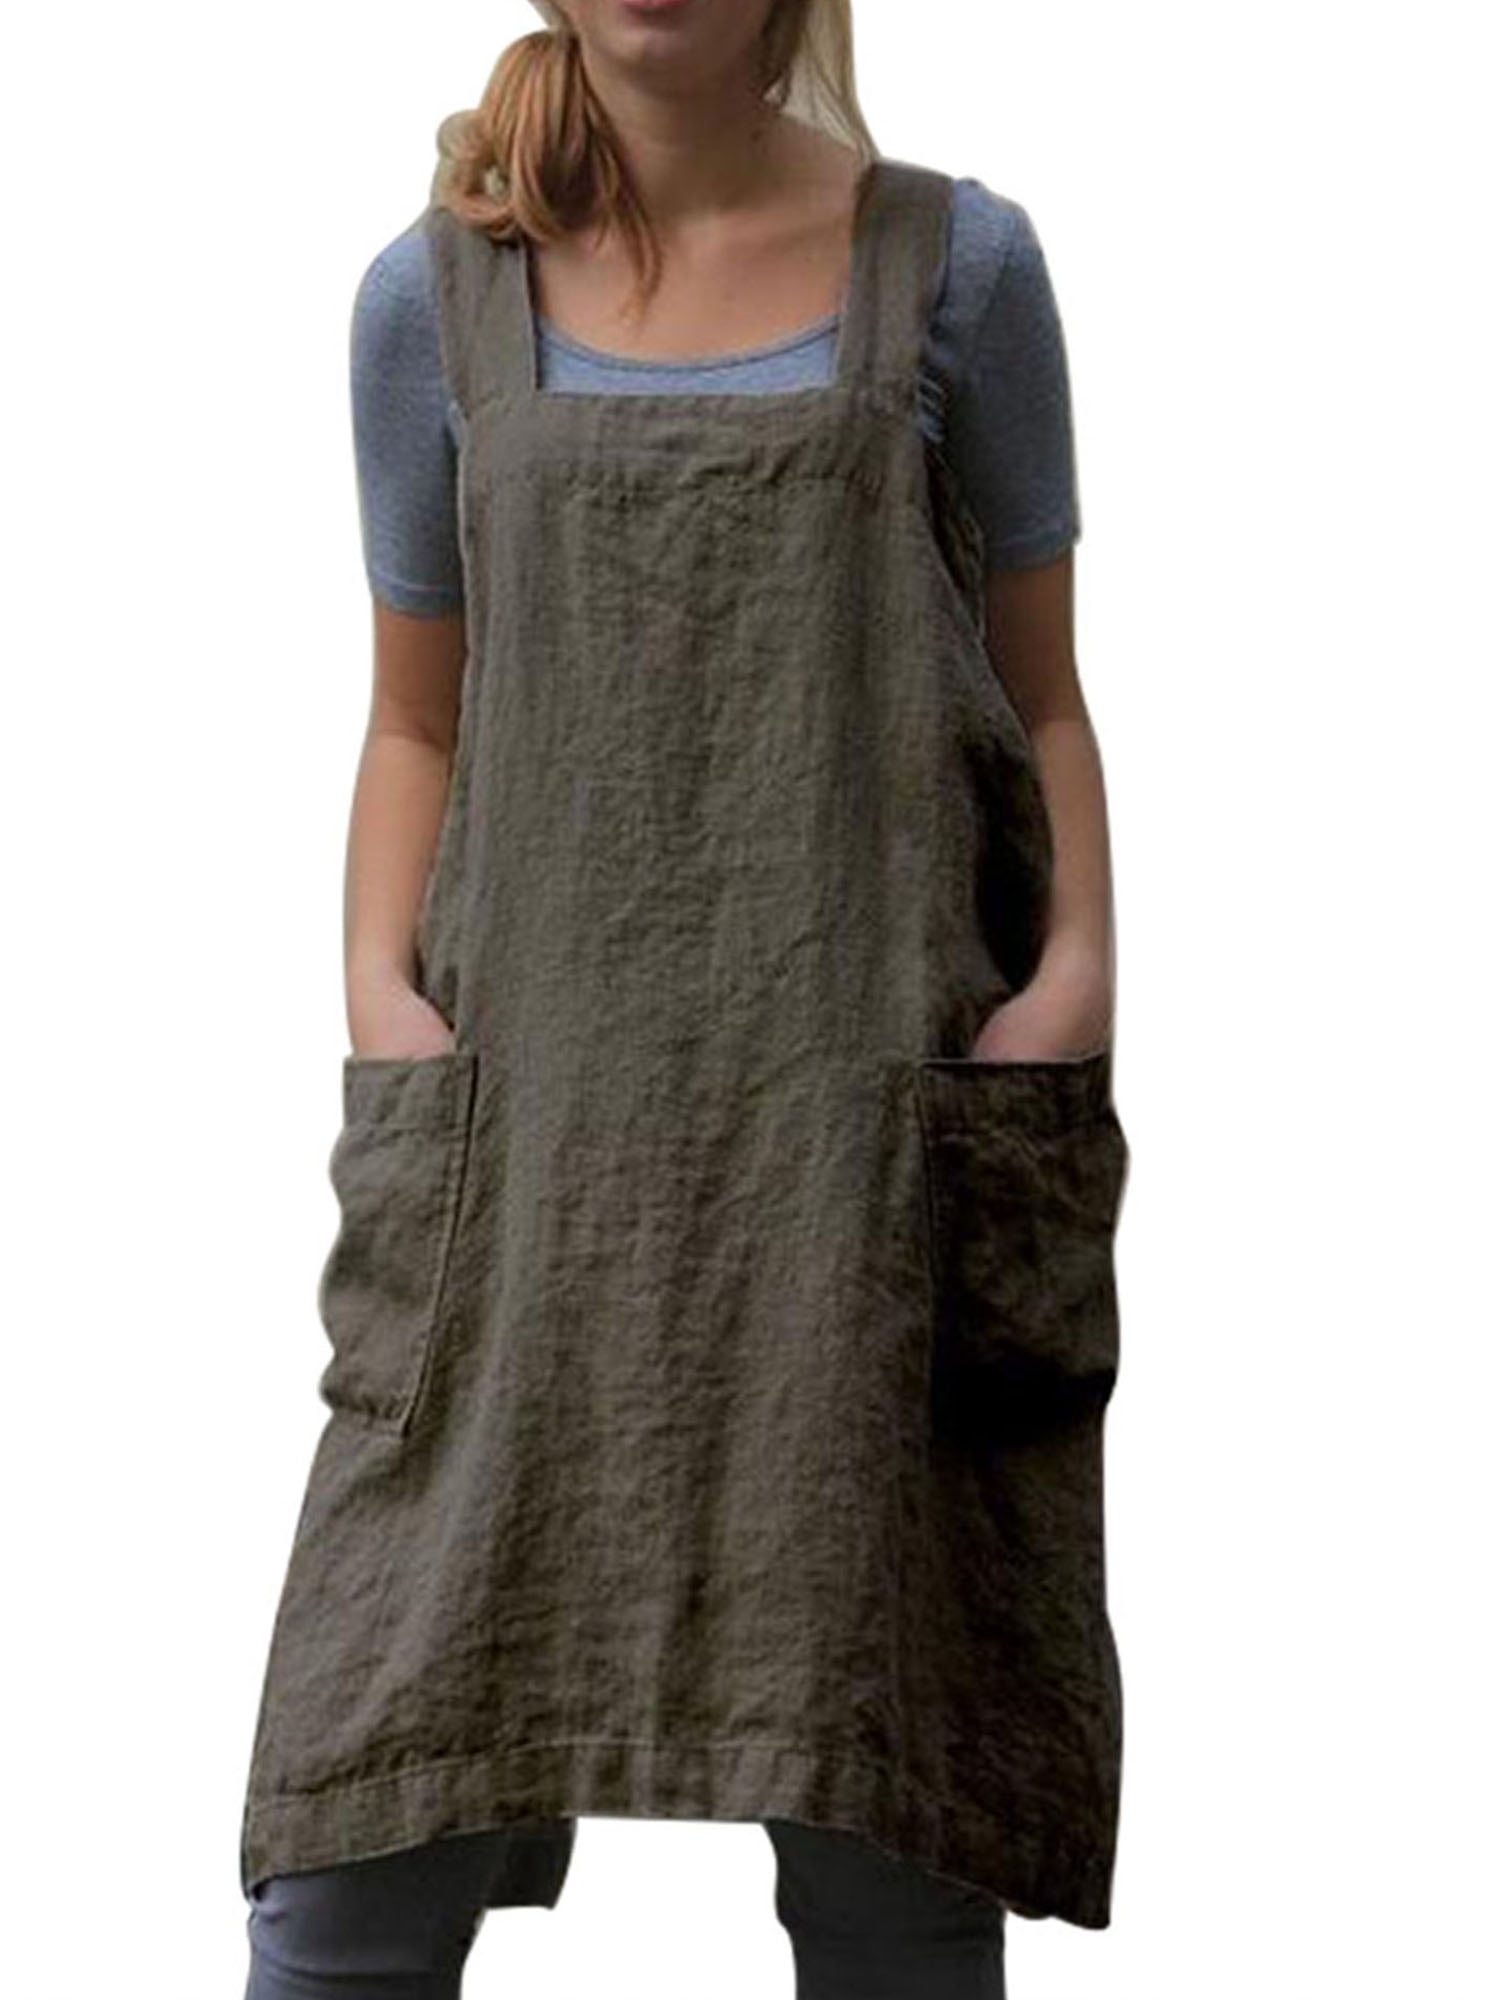 Cotton Linen Cross Back Apron for Women with Pockets for Cooking Baking Painting Gardening Cleaning